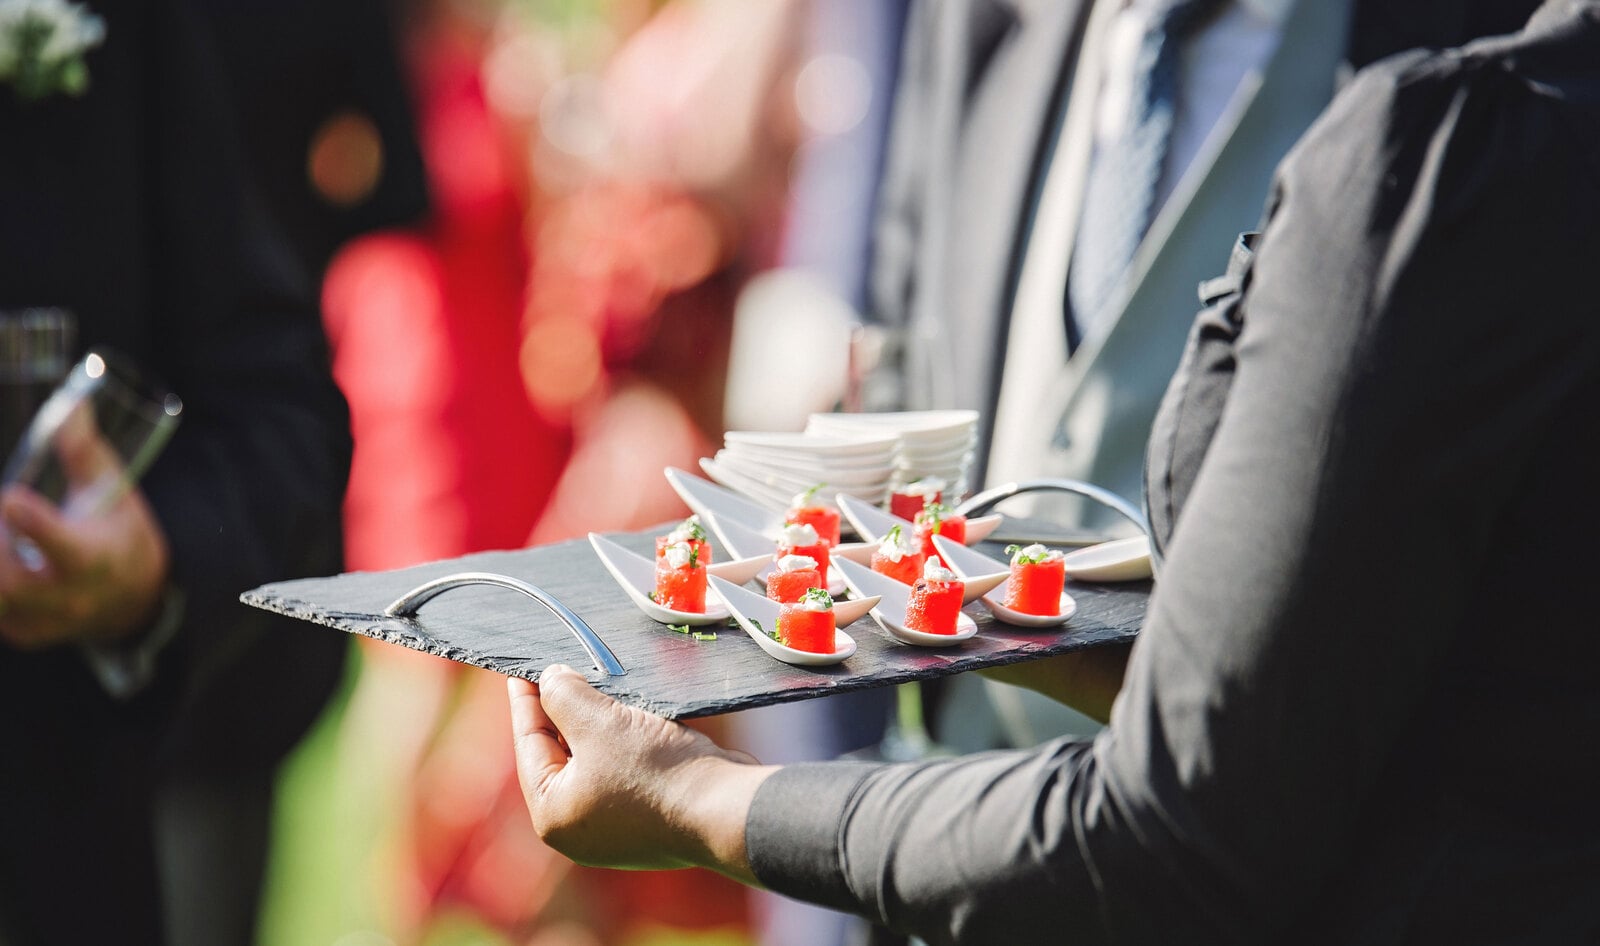 Plant-Based Catering Helps Large Events Slash Greenhouse Gases By as Much as 10 Tons, Report Finds